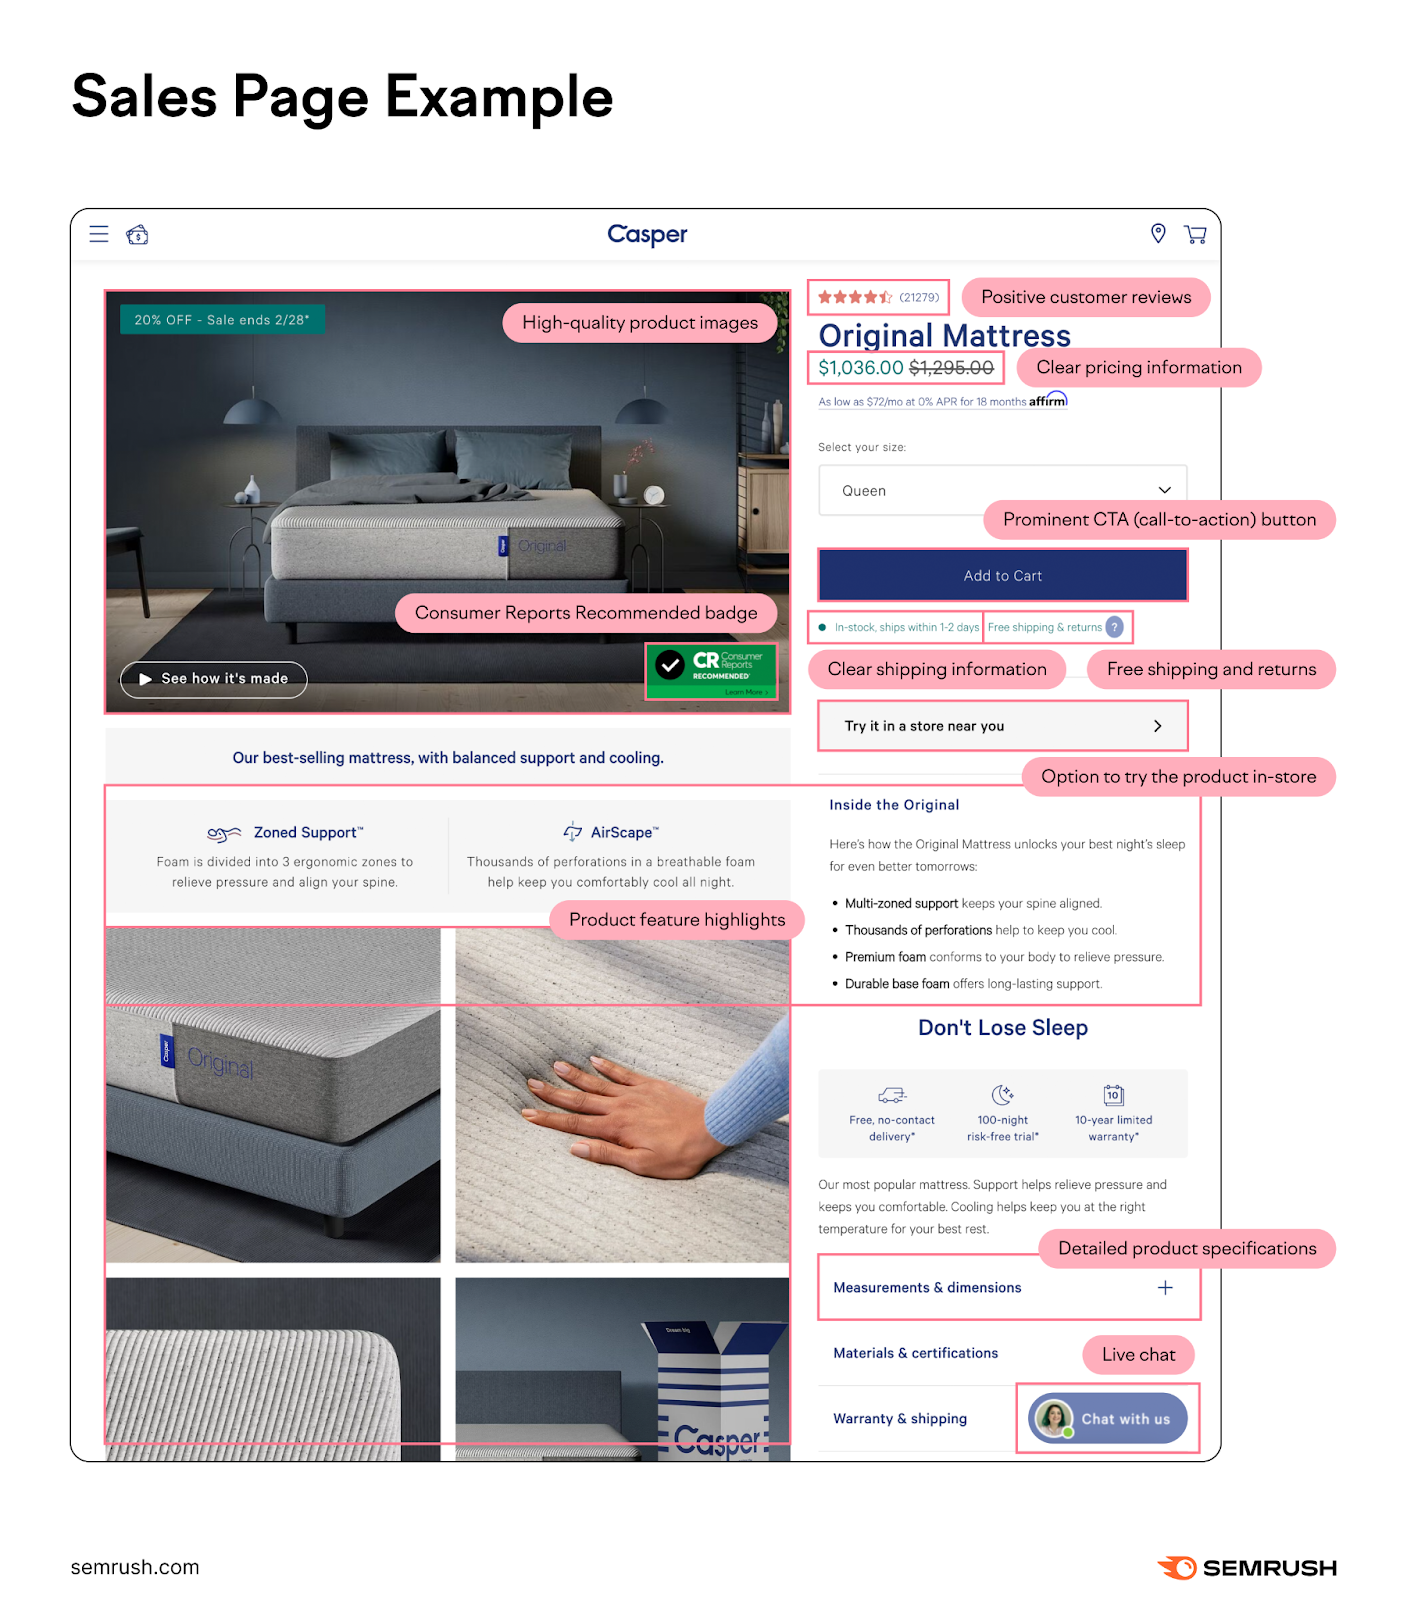 Sales Page Example